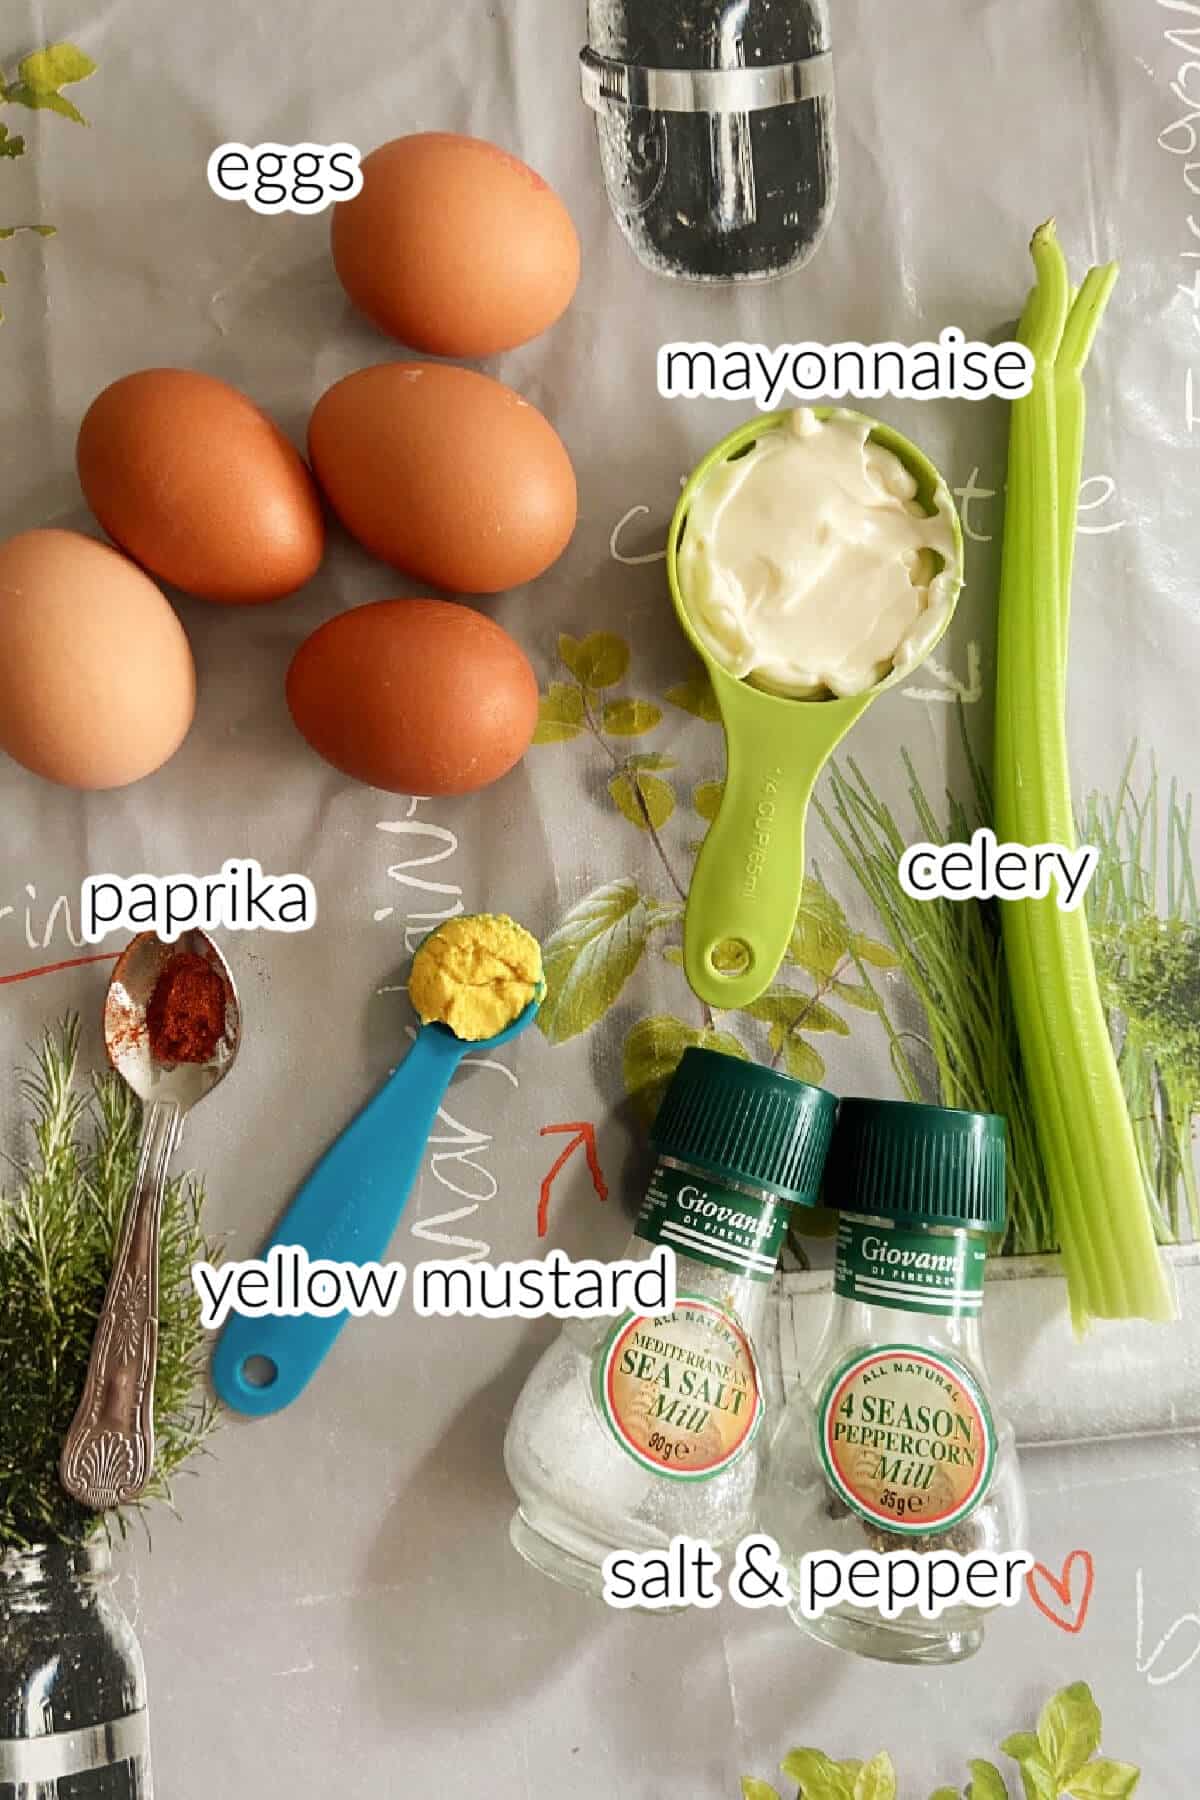 Ingredients needed to make egg sandwich.